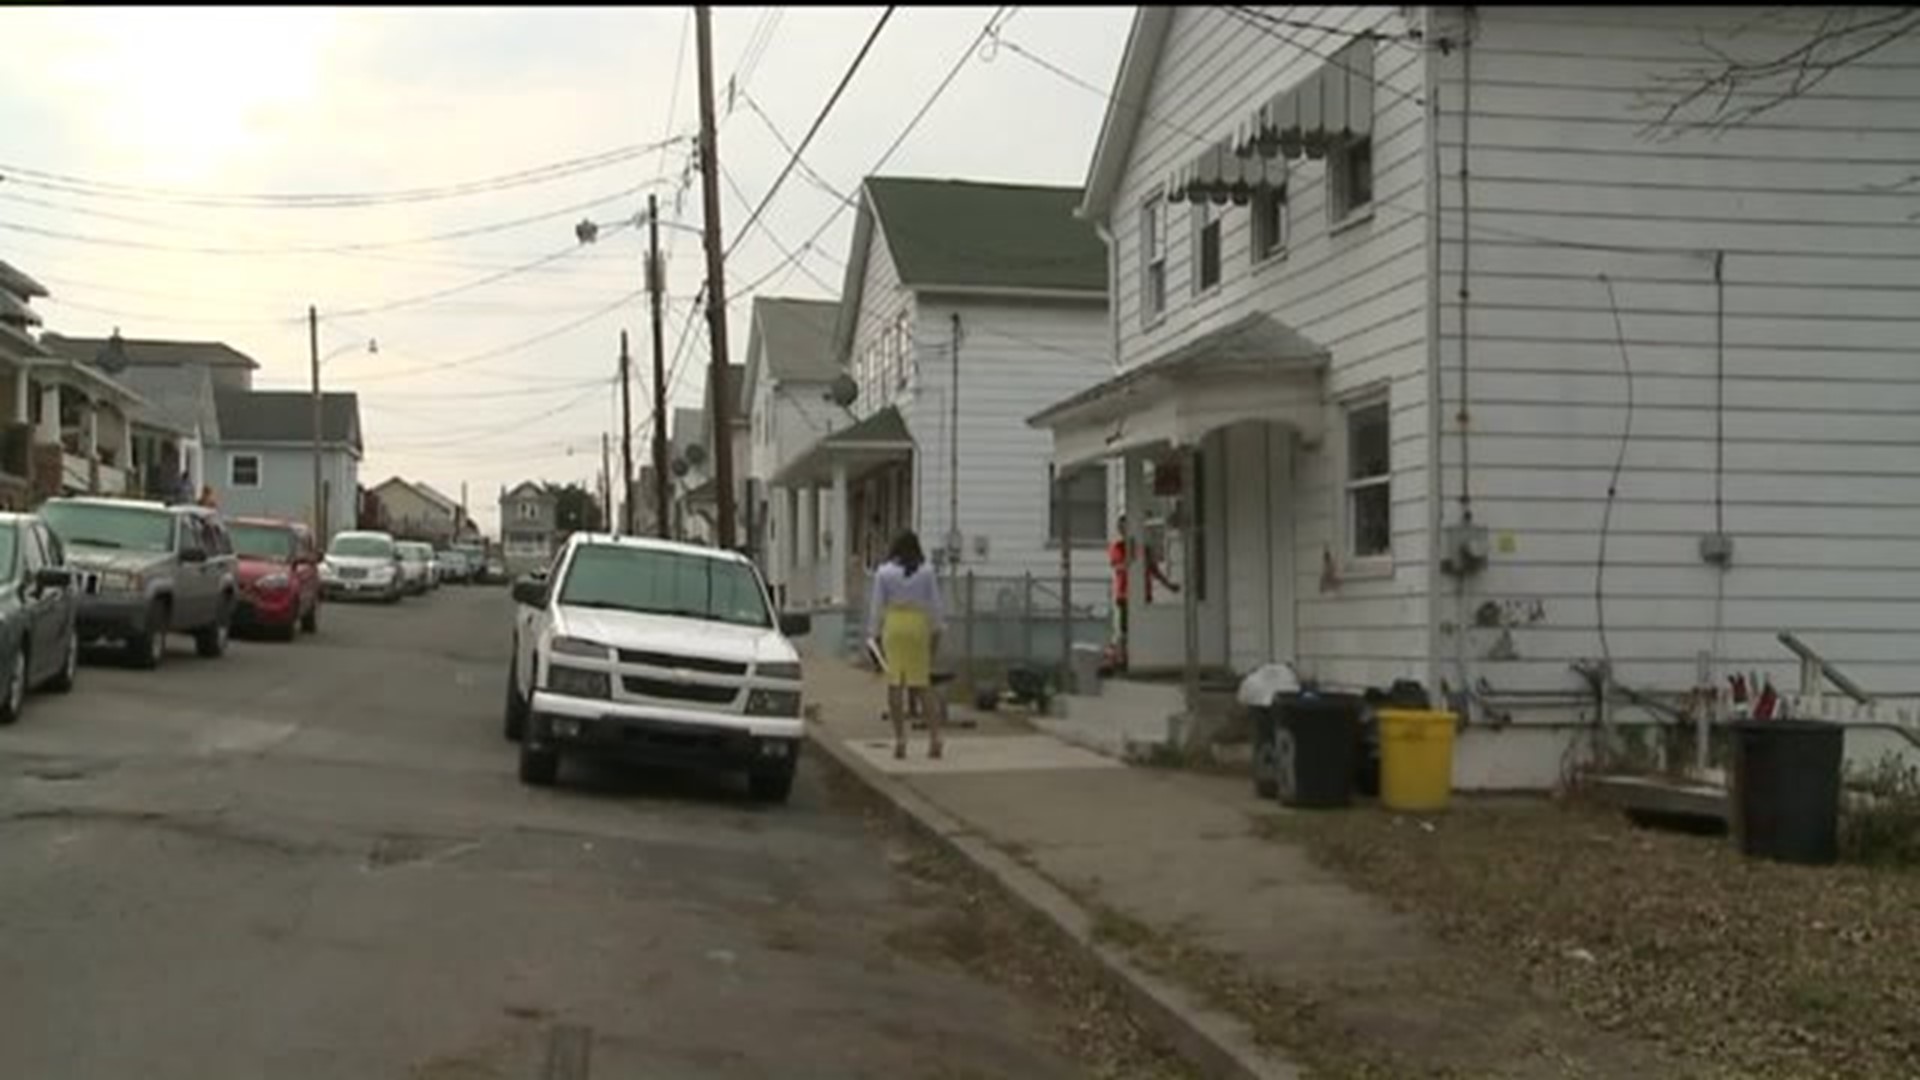 Police: Masked Man Attacking People with Bow and Arrow in Nanticoke